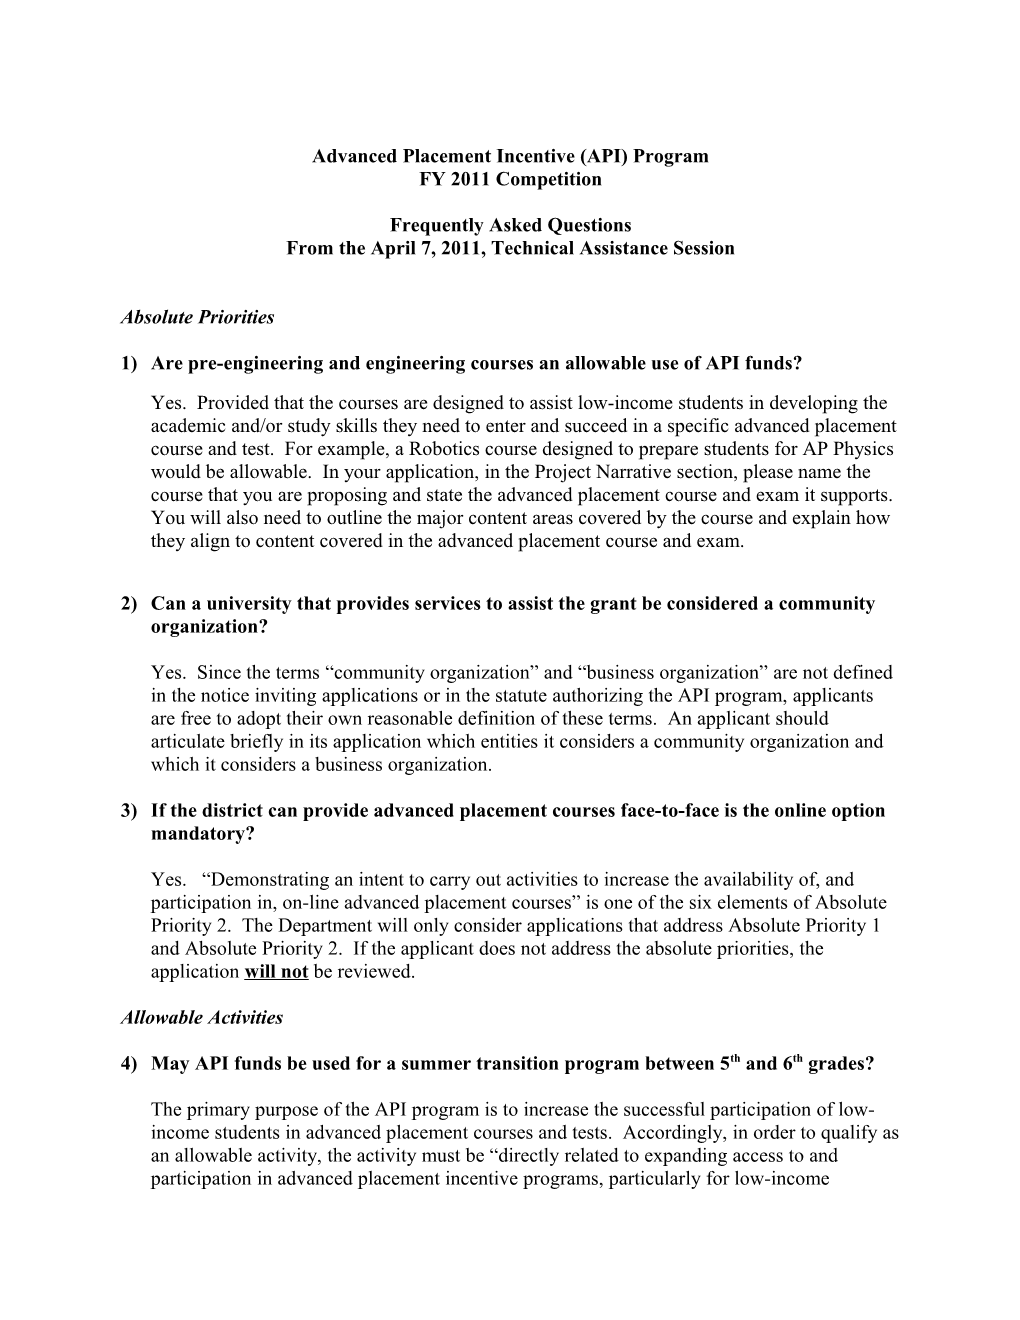 Faqs for Advanced Placement Incentive Program FY 2011 Competition